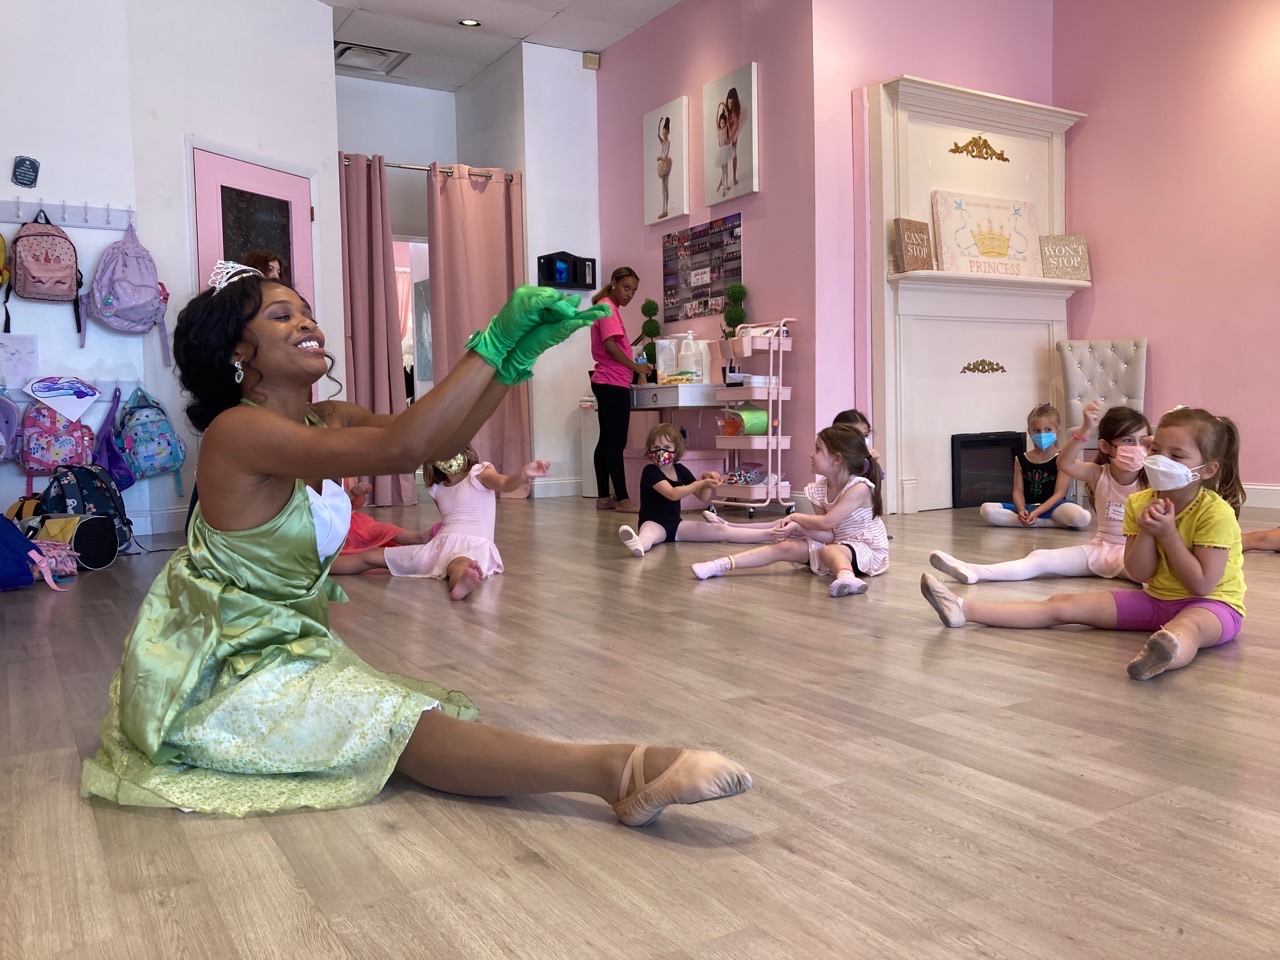 children to teacher ratios are important when choosing a dance studio for your kid